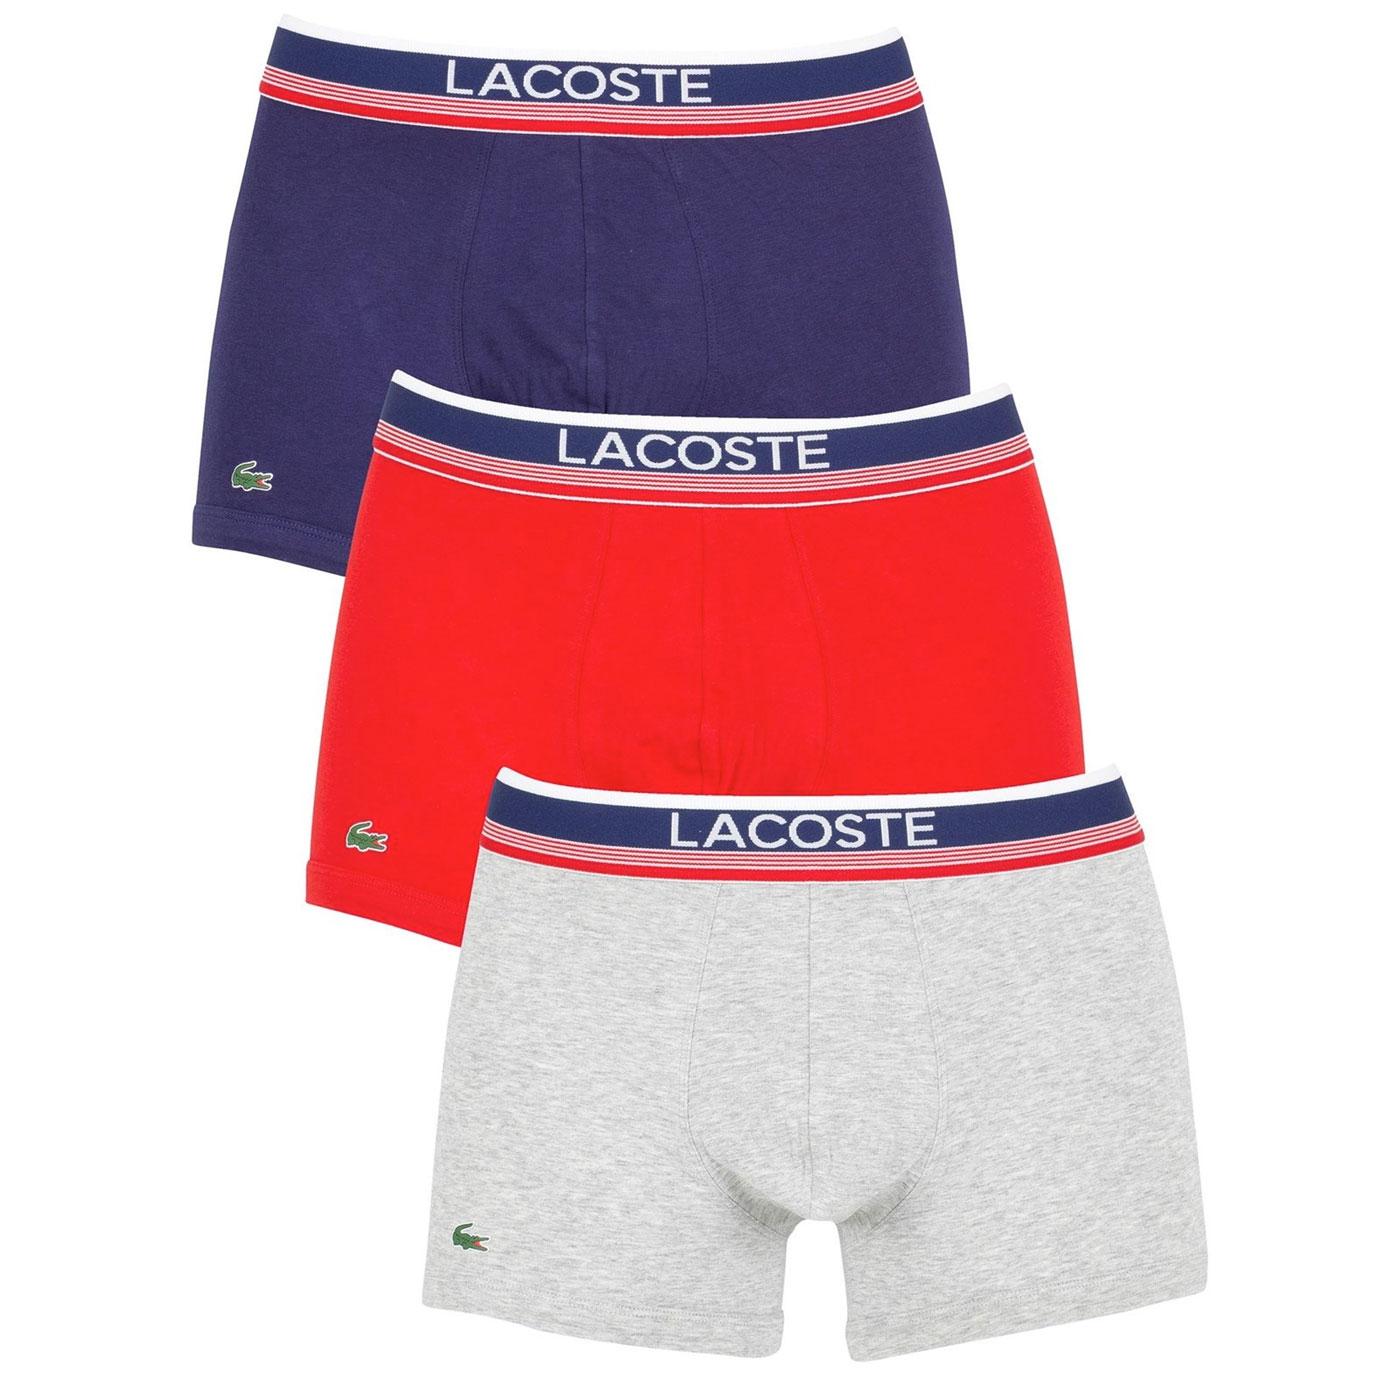 3 PACK LACOSTE COTTON STRETCH 162631 BOXER SHORTS IN BLUE/RED/GREY 